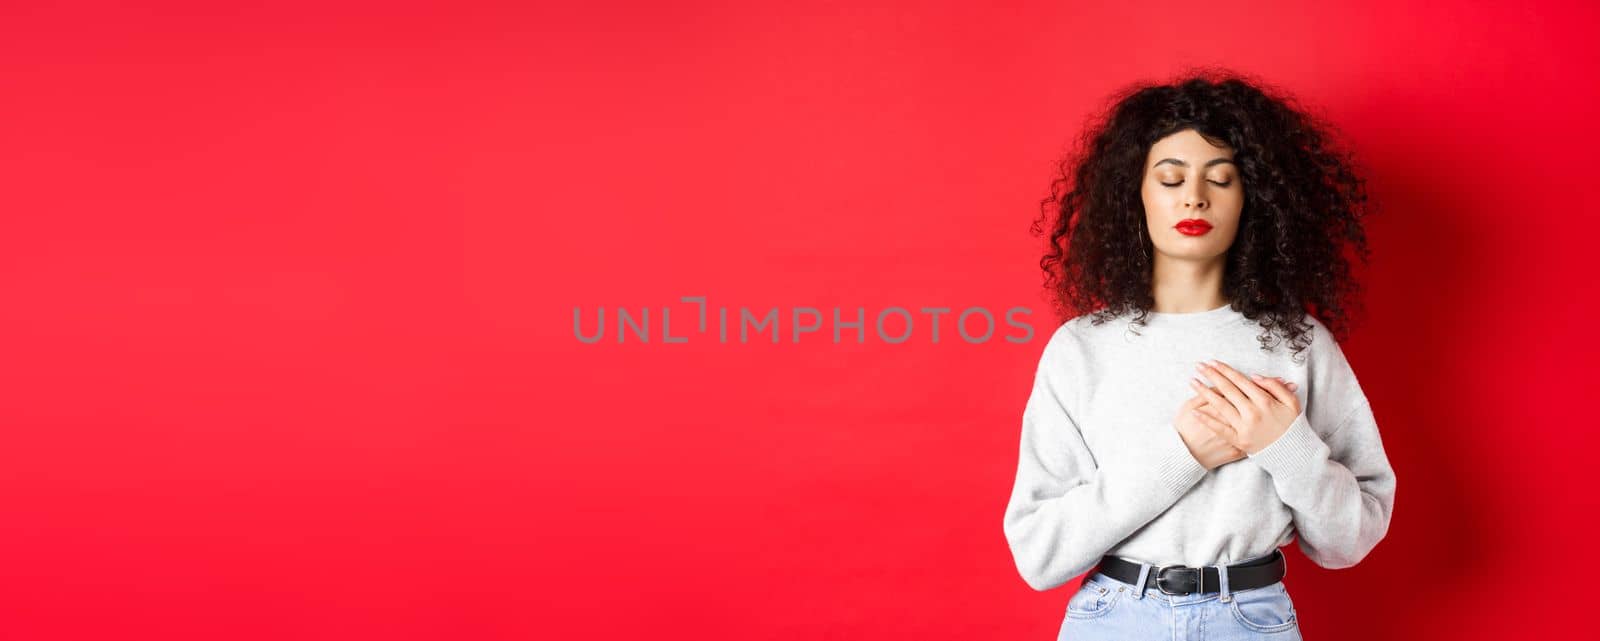 Image of calm young woman with curly hairsty, close eyes and holding hands on heart, keeping warm memories, feeling nostalgic, standing on red background.